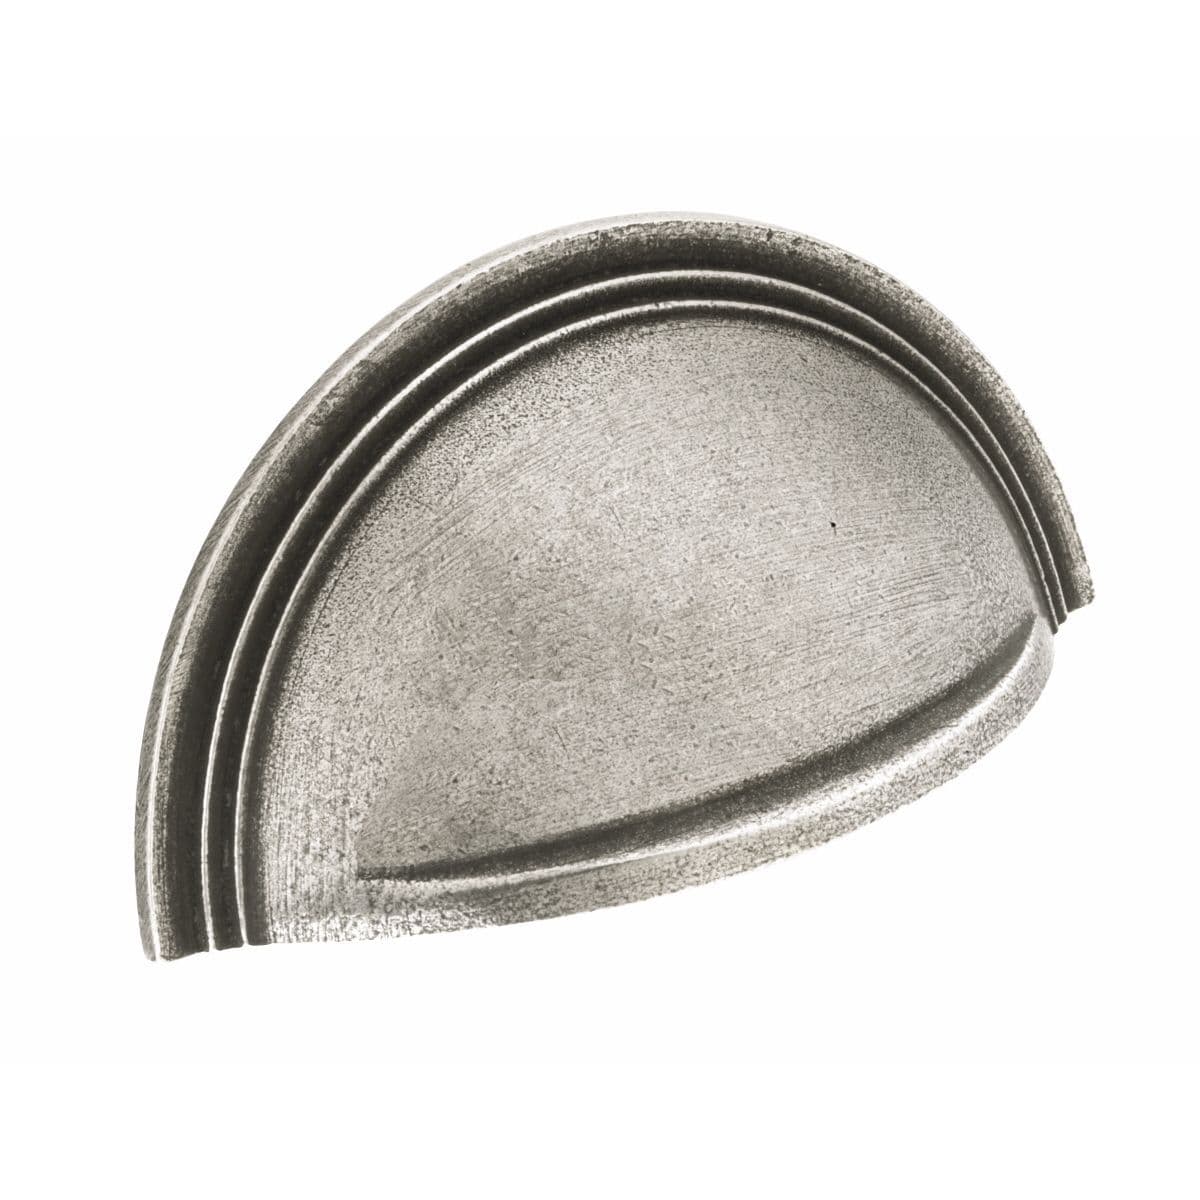 CROMWELL CUP Cupboard Handle - 64mm h/c size - RAW PEWTER finish (PWS H1111.64.PE)